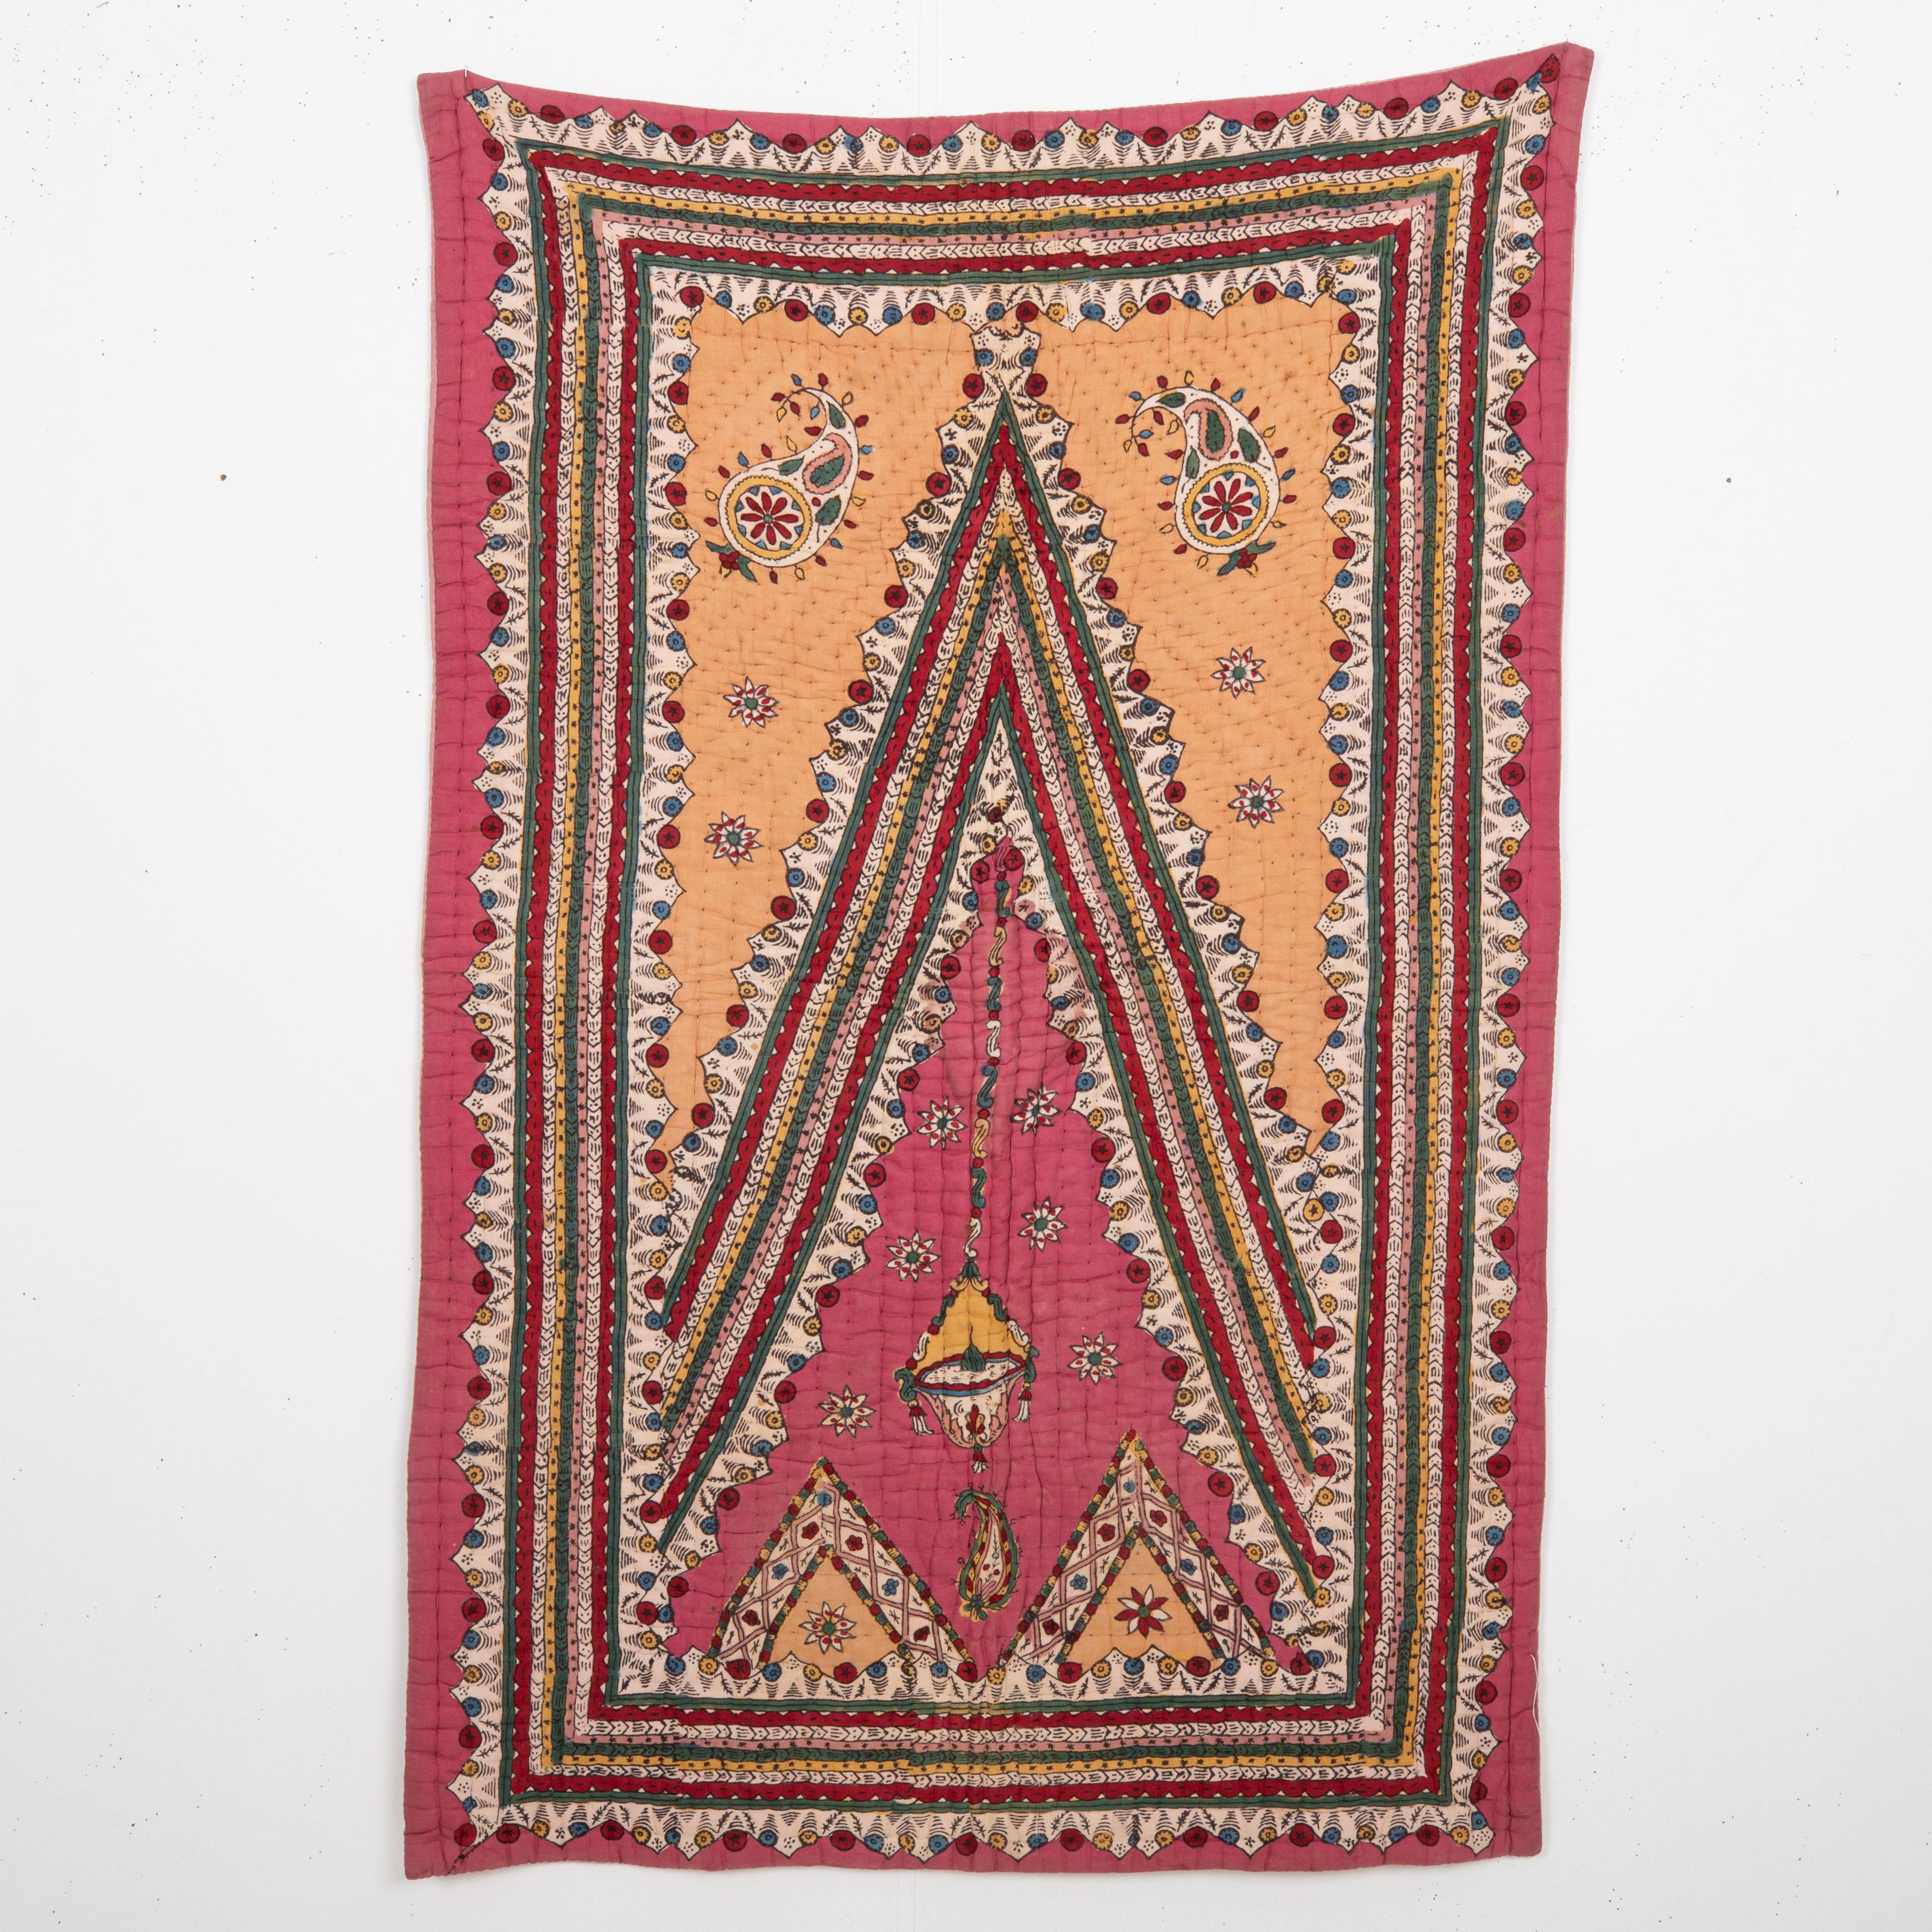 Hand Block printing is one of the land marks of Western Anatolian material culture. These quilts have been used either as prayer mats of wall hangings.
